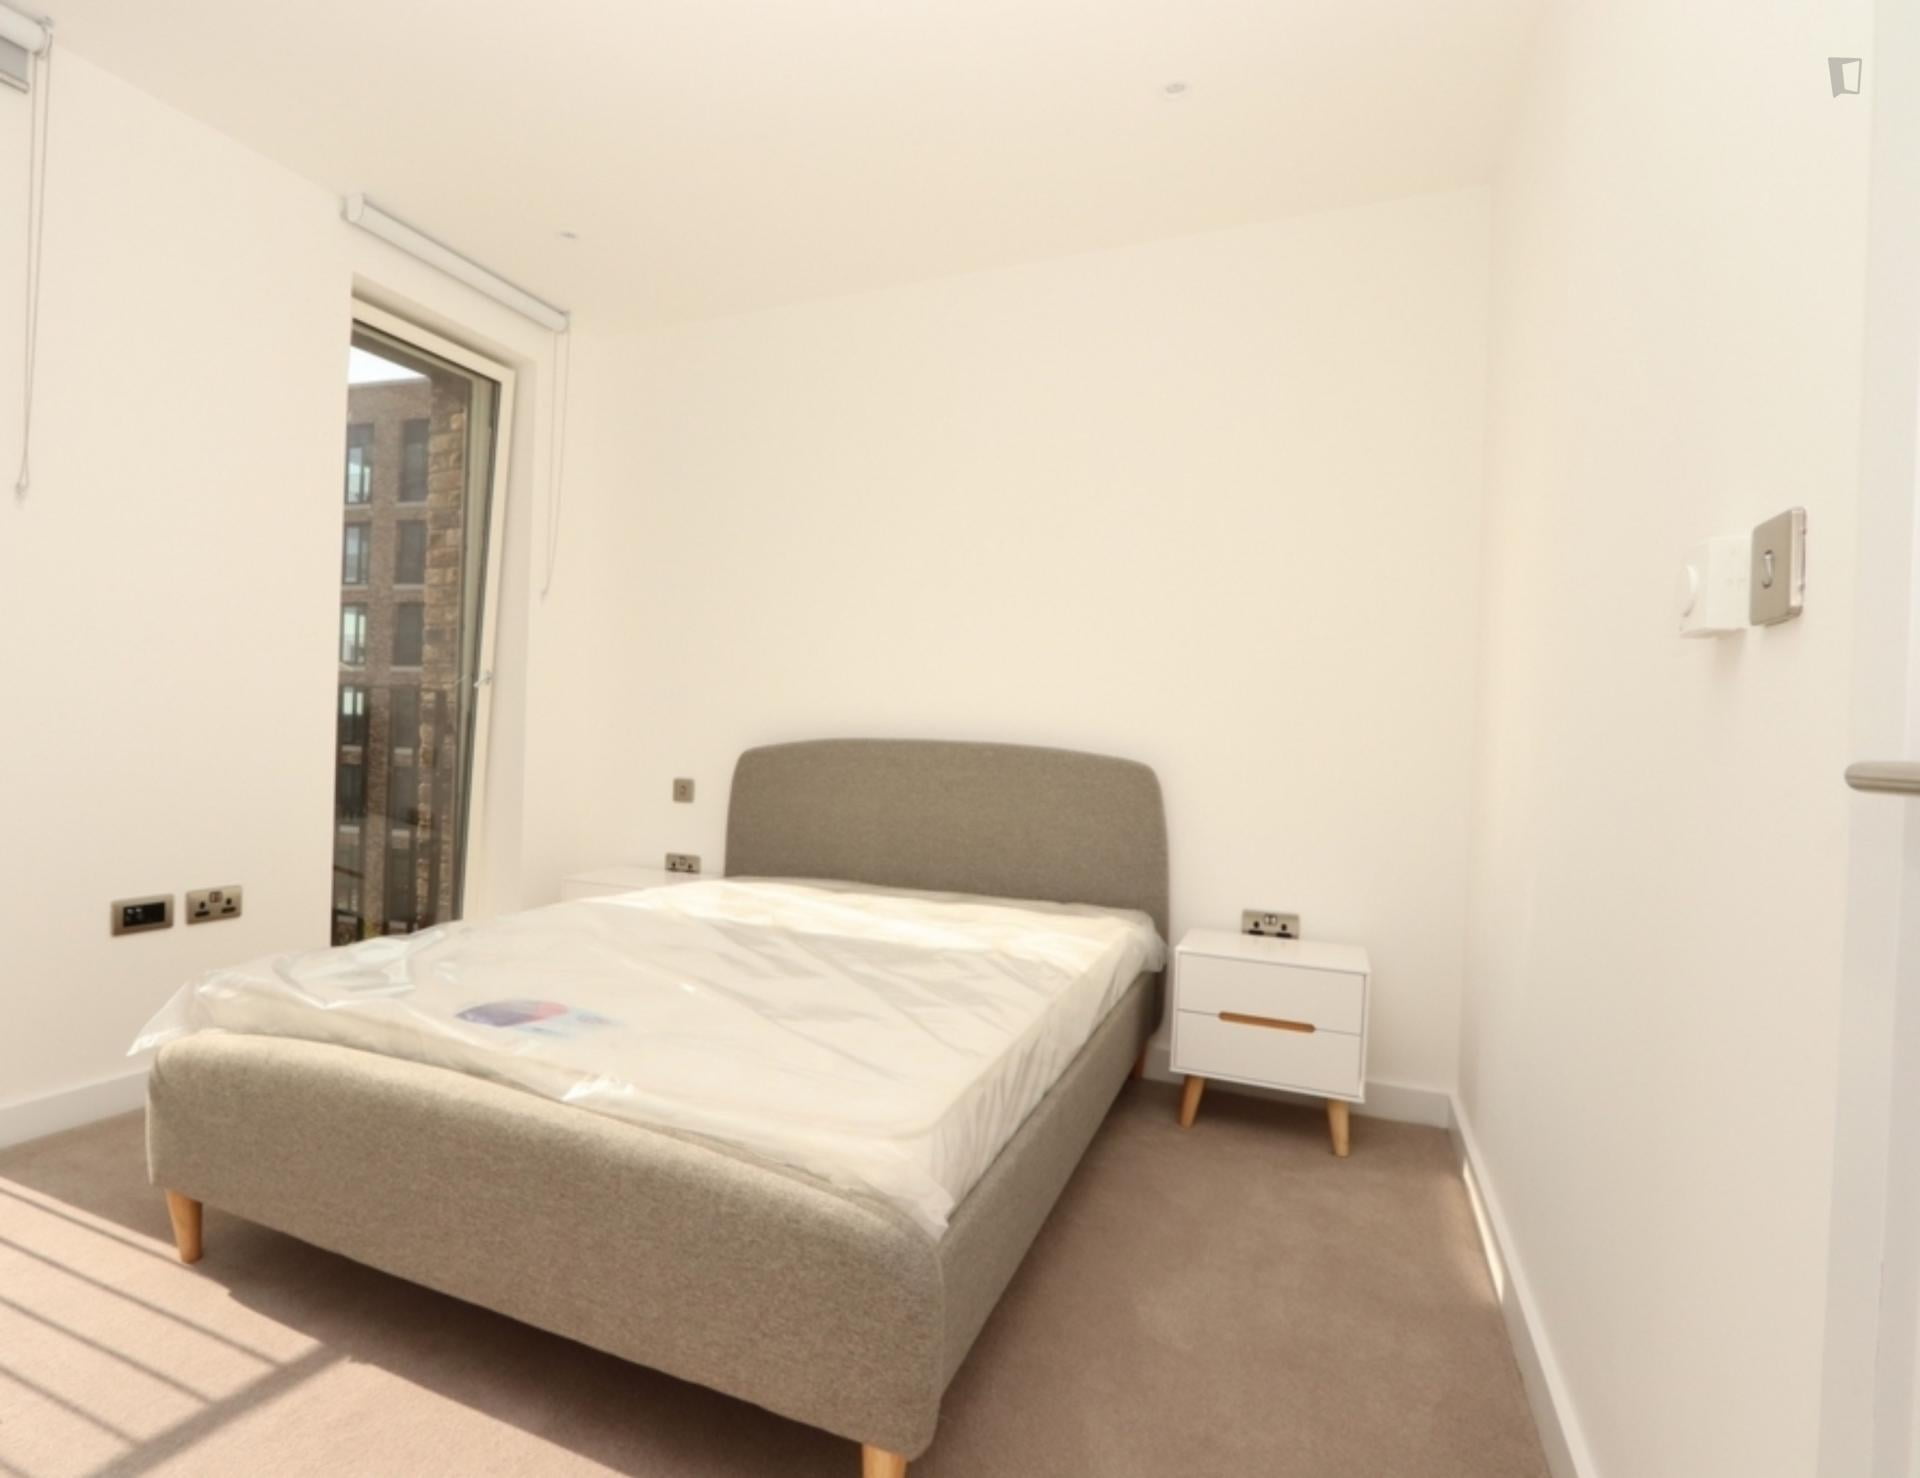 Quays Road- Modern flat ready for expats in London